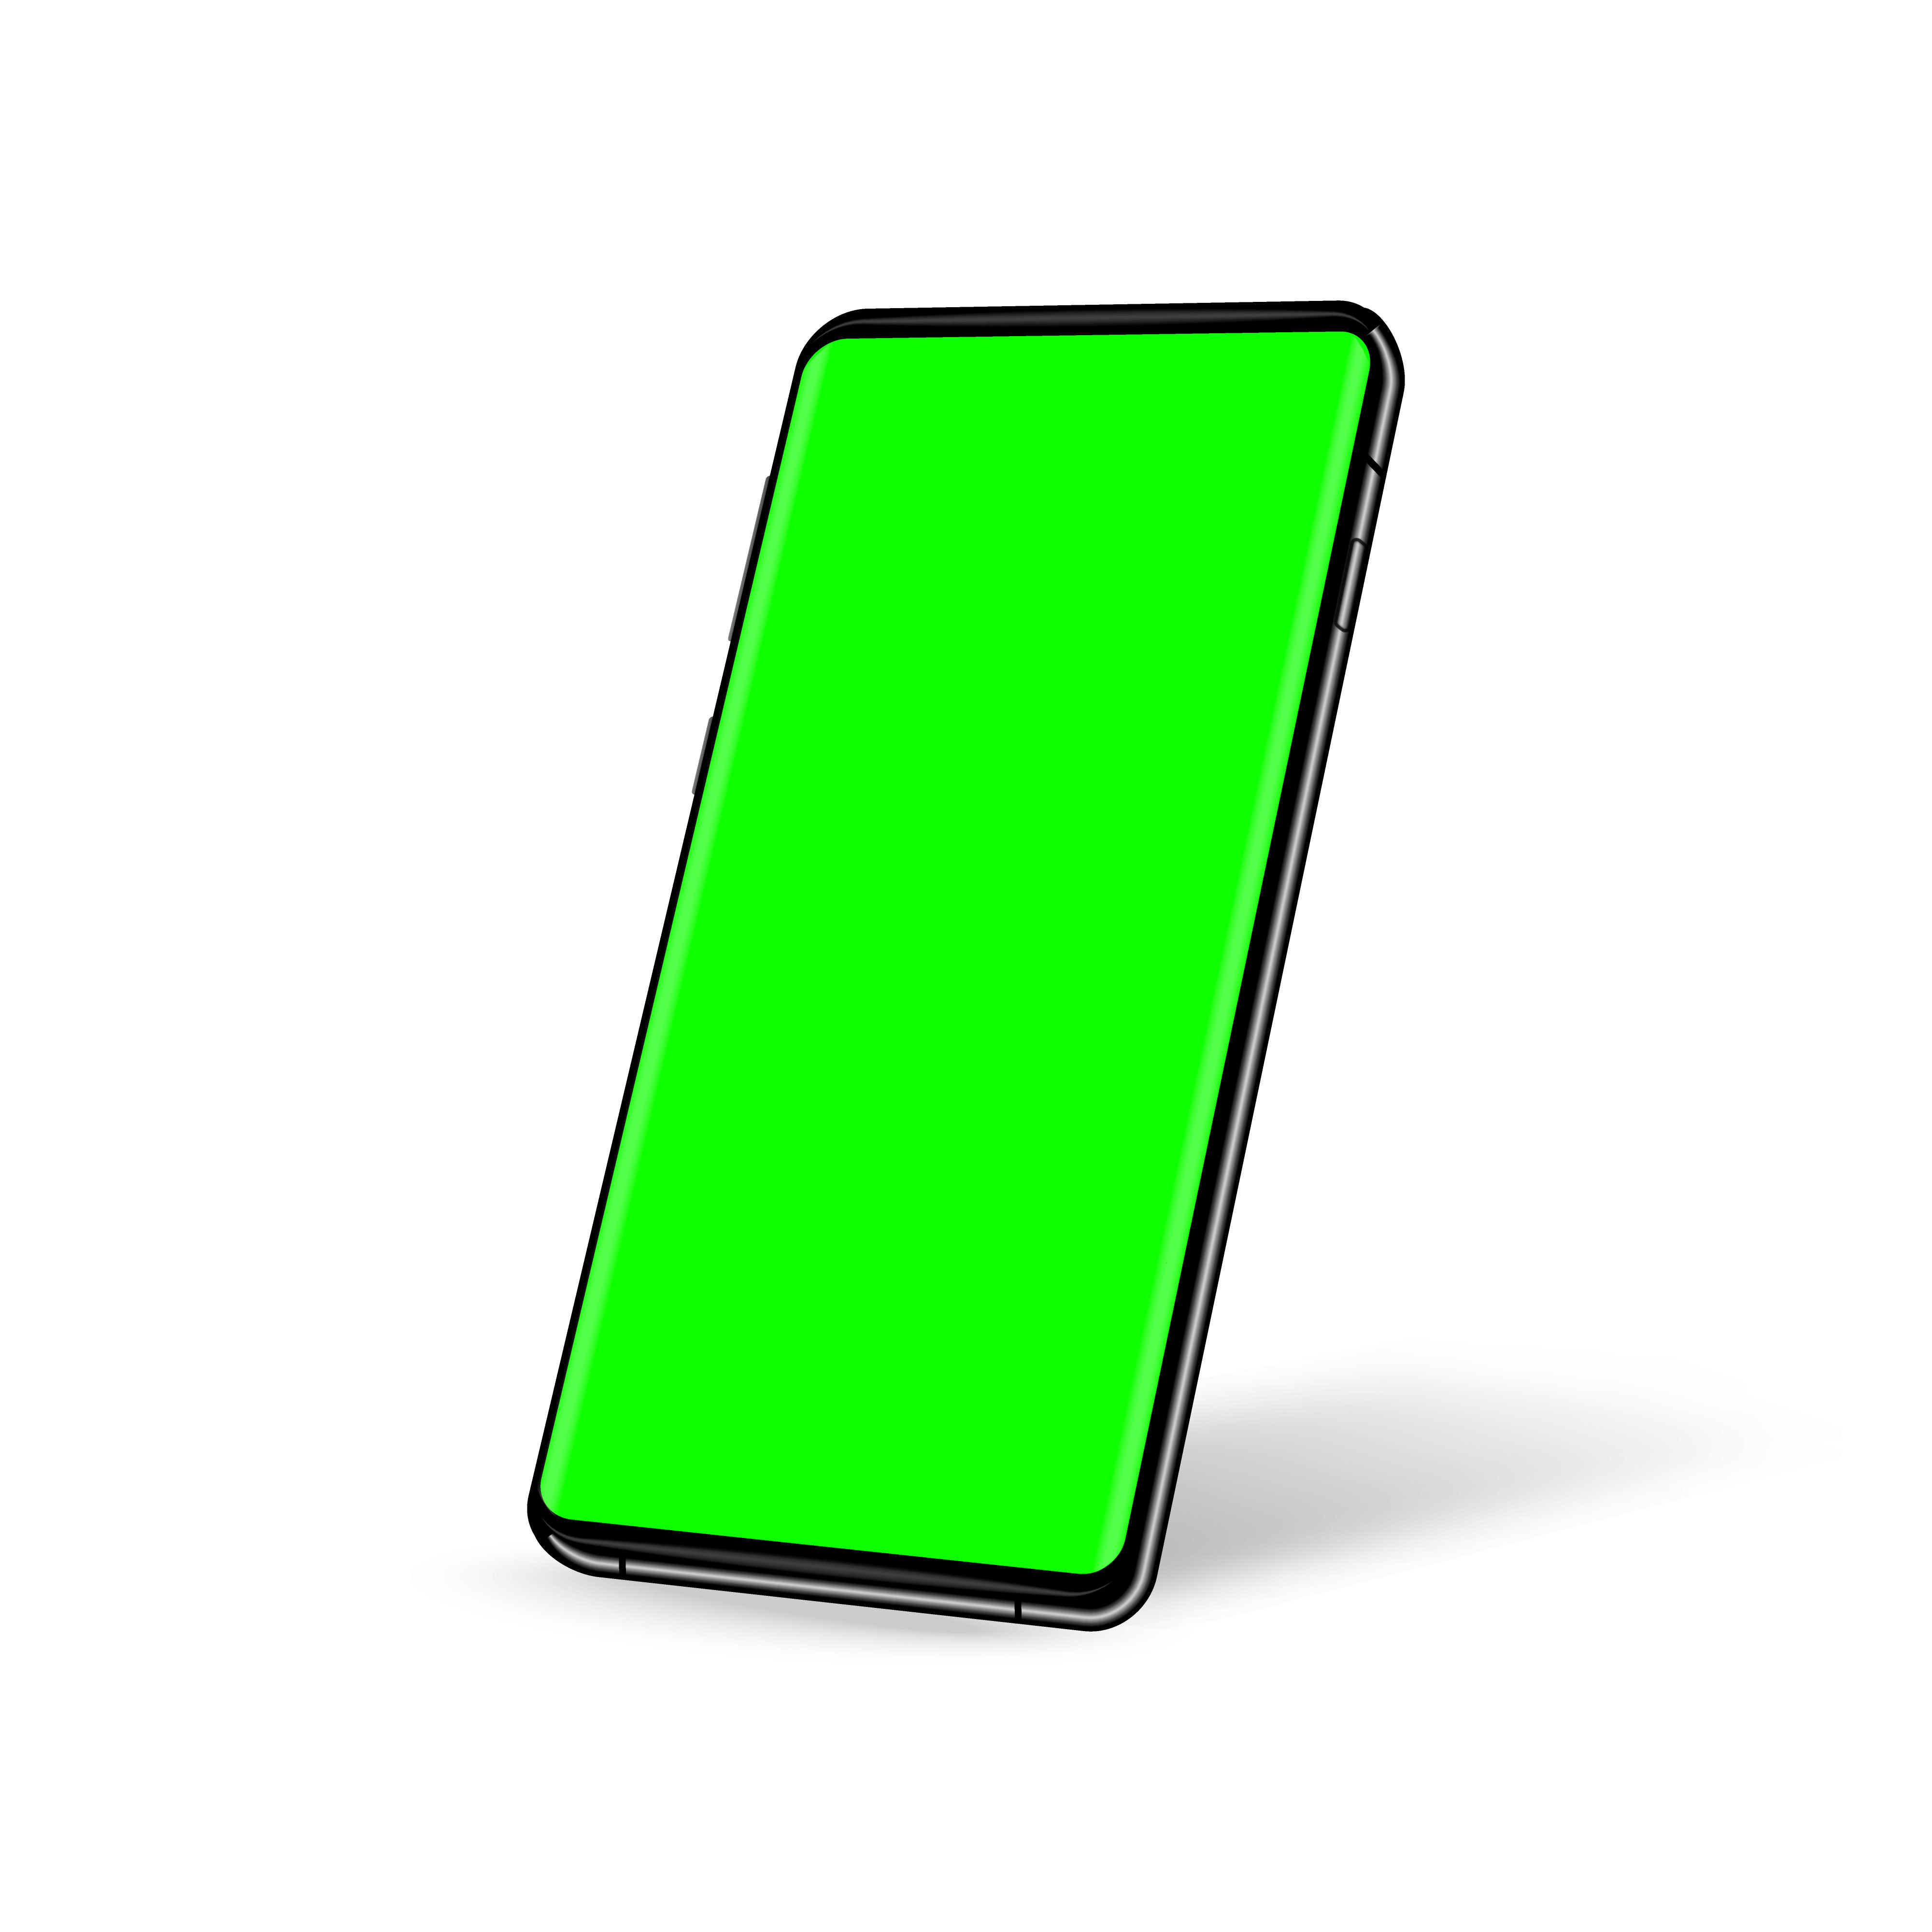 Phone with green screen chroma key background. Vector illustration. Phone with green screen chroma key background. Template for your design